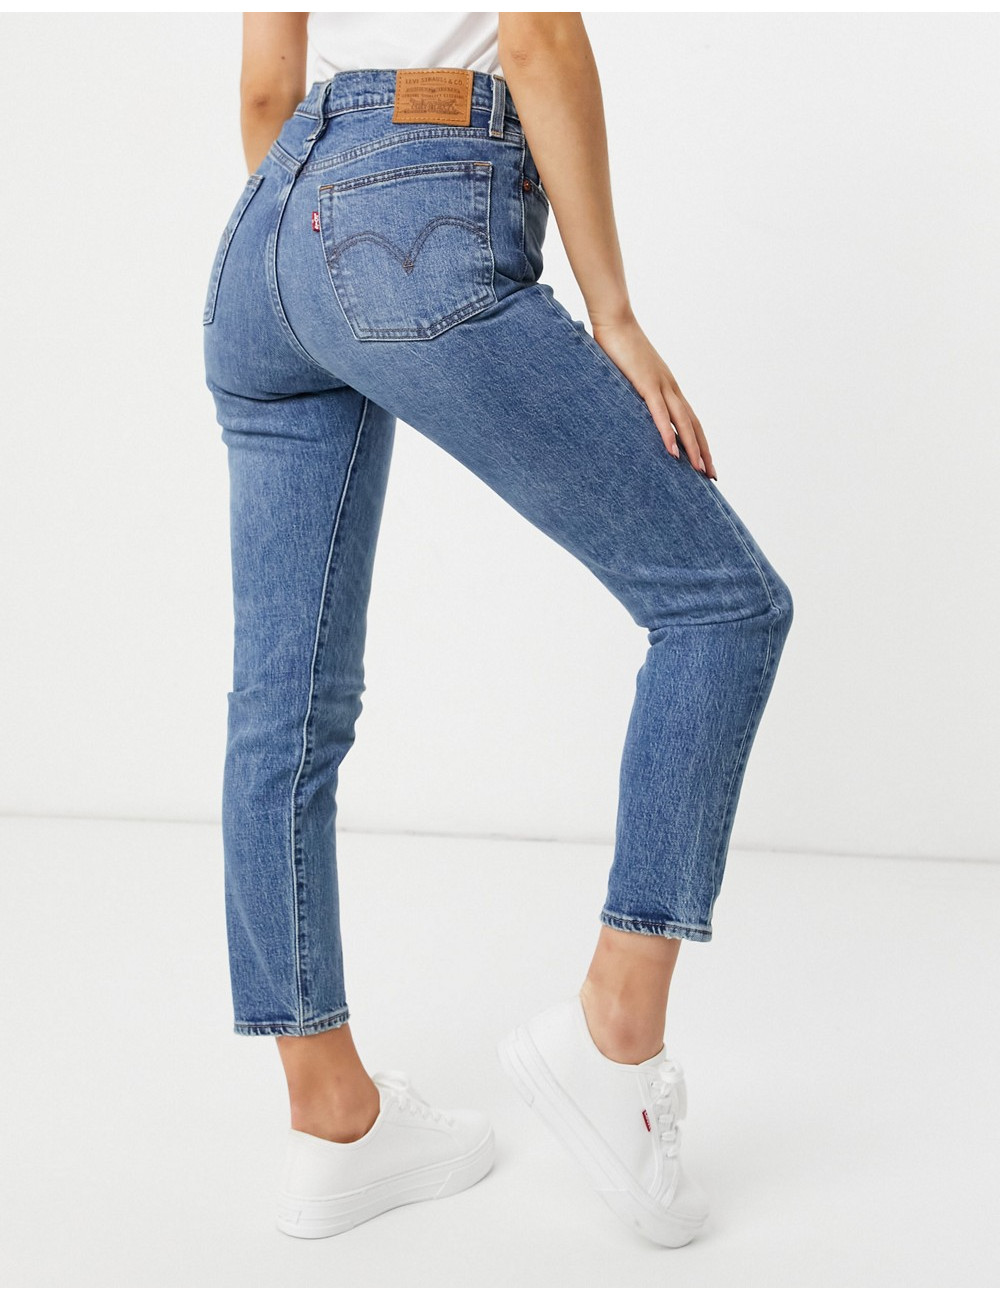 Levi's wedgie icon fit...